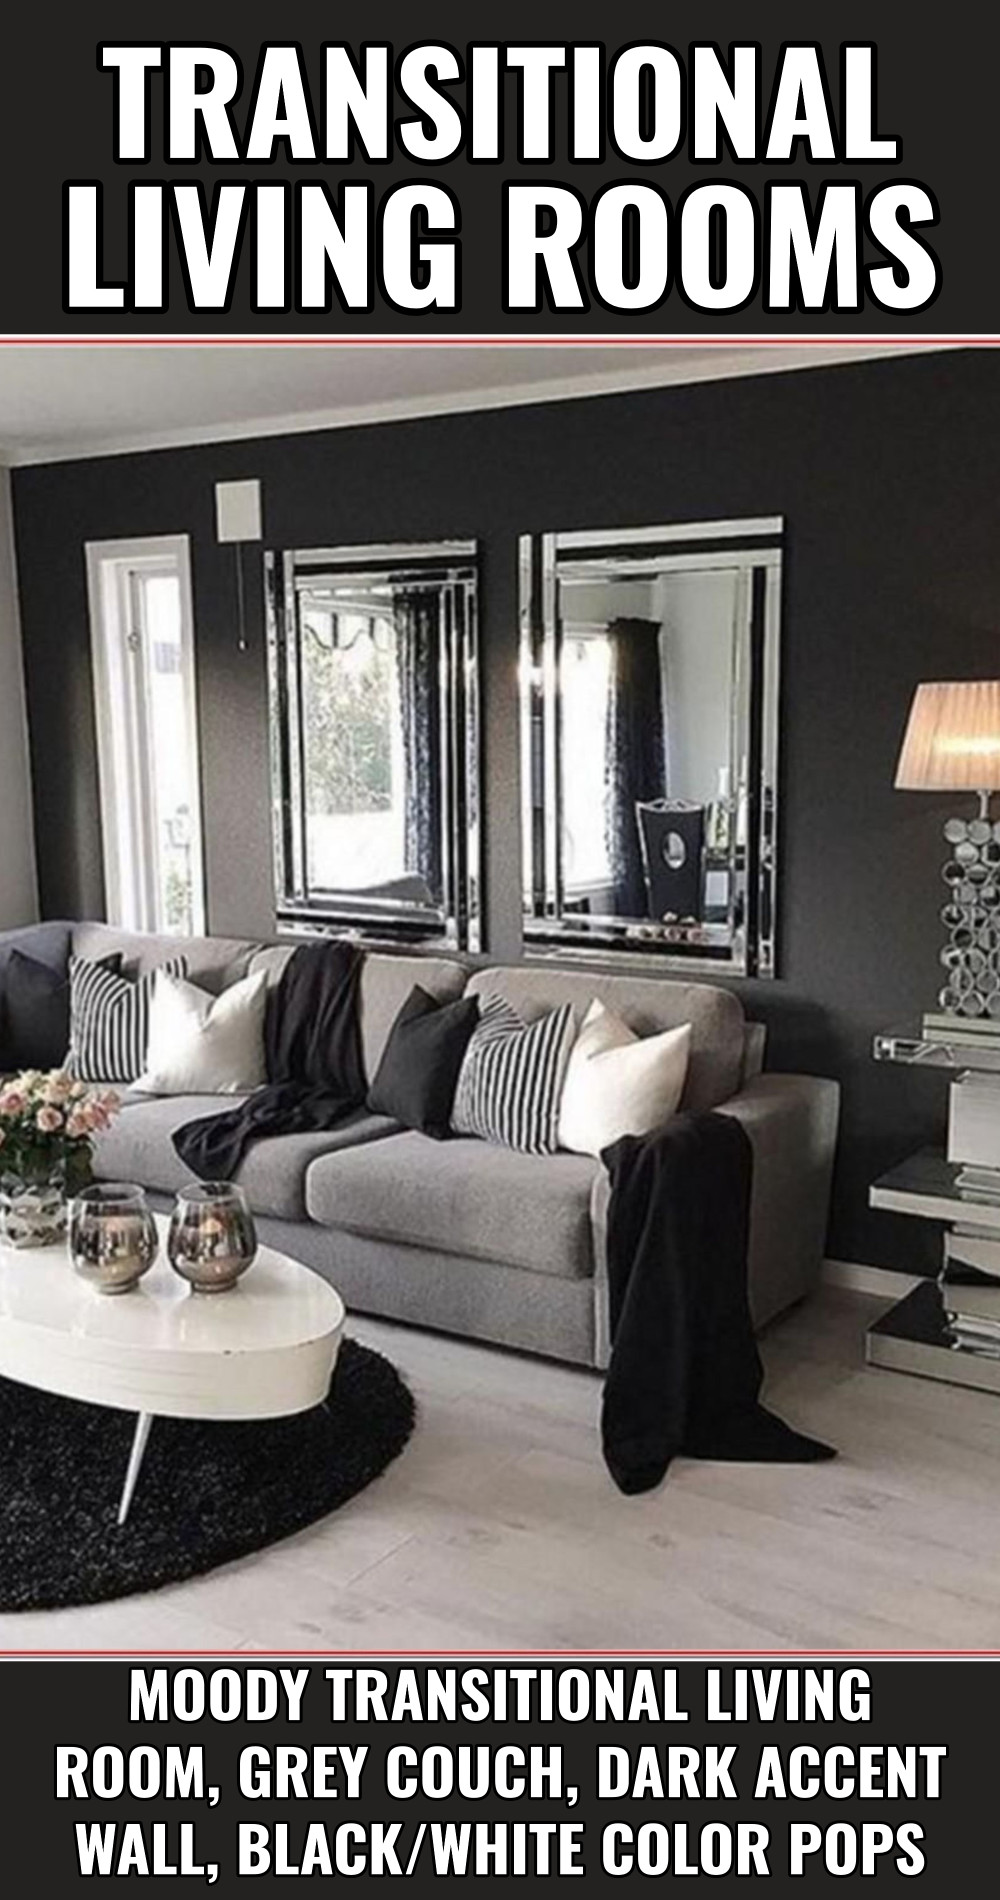 transitional living room moody decor grey couch dark accent wall black white pops of color